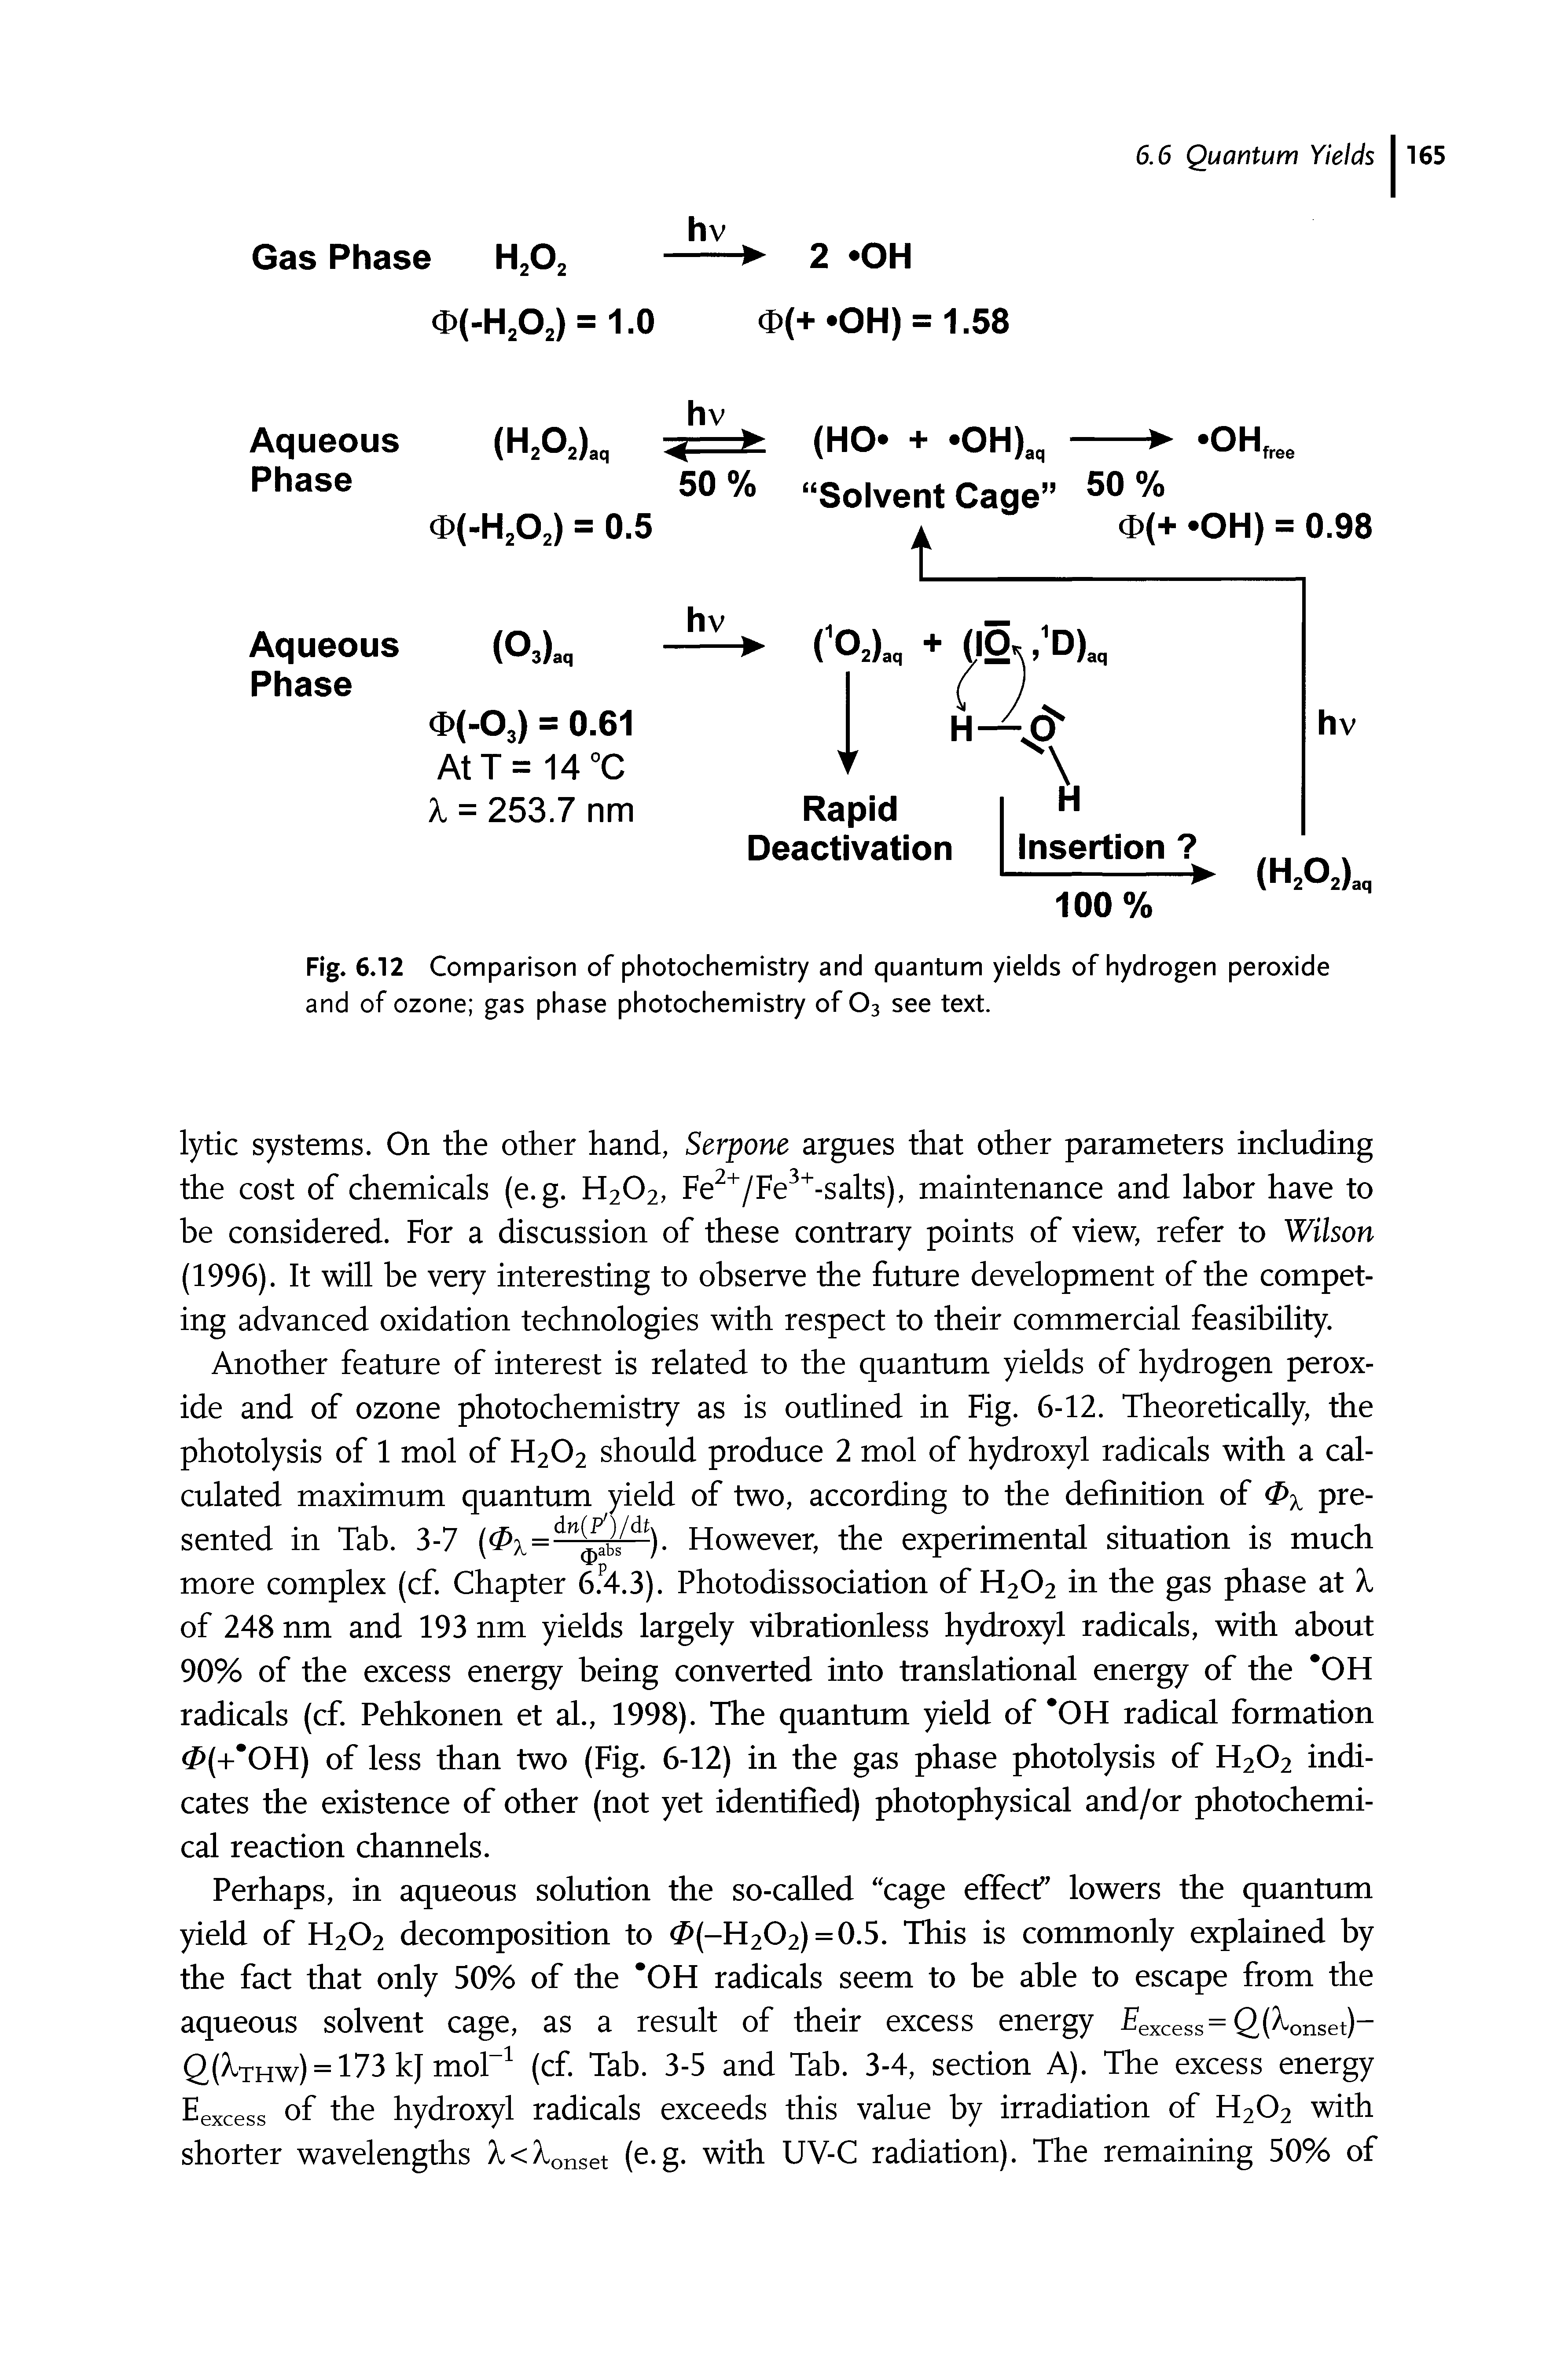 Fig. 6.12 Comparison of photochemistry and quantum yields of hydrogen peroxide and of ozone gas phase photochemistry of O3 see text.